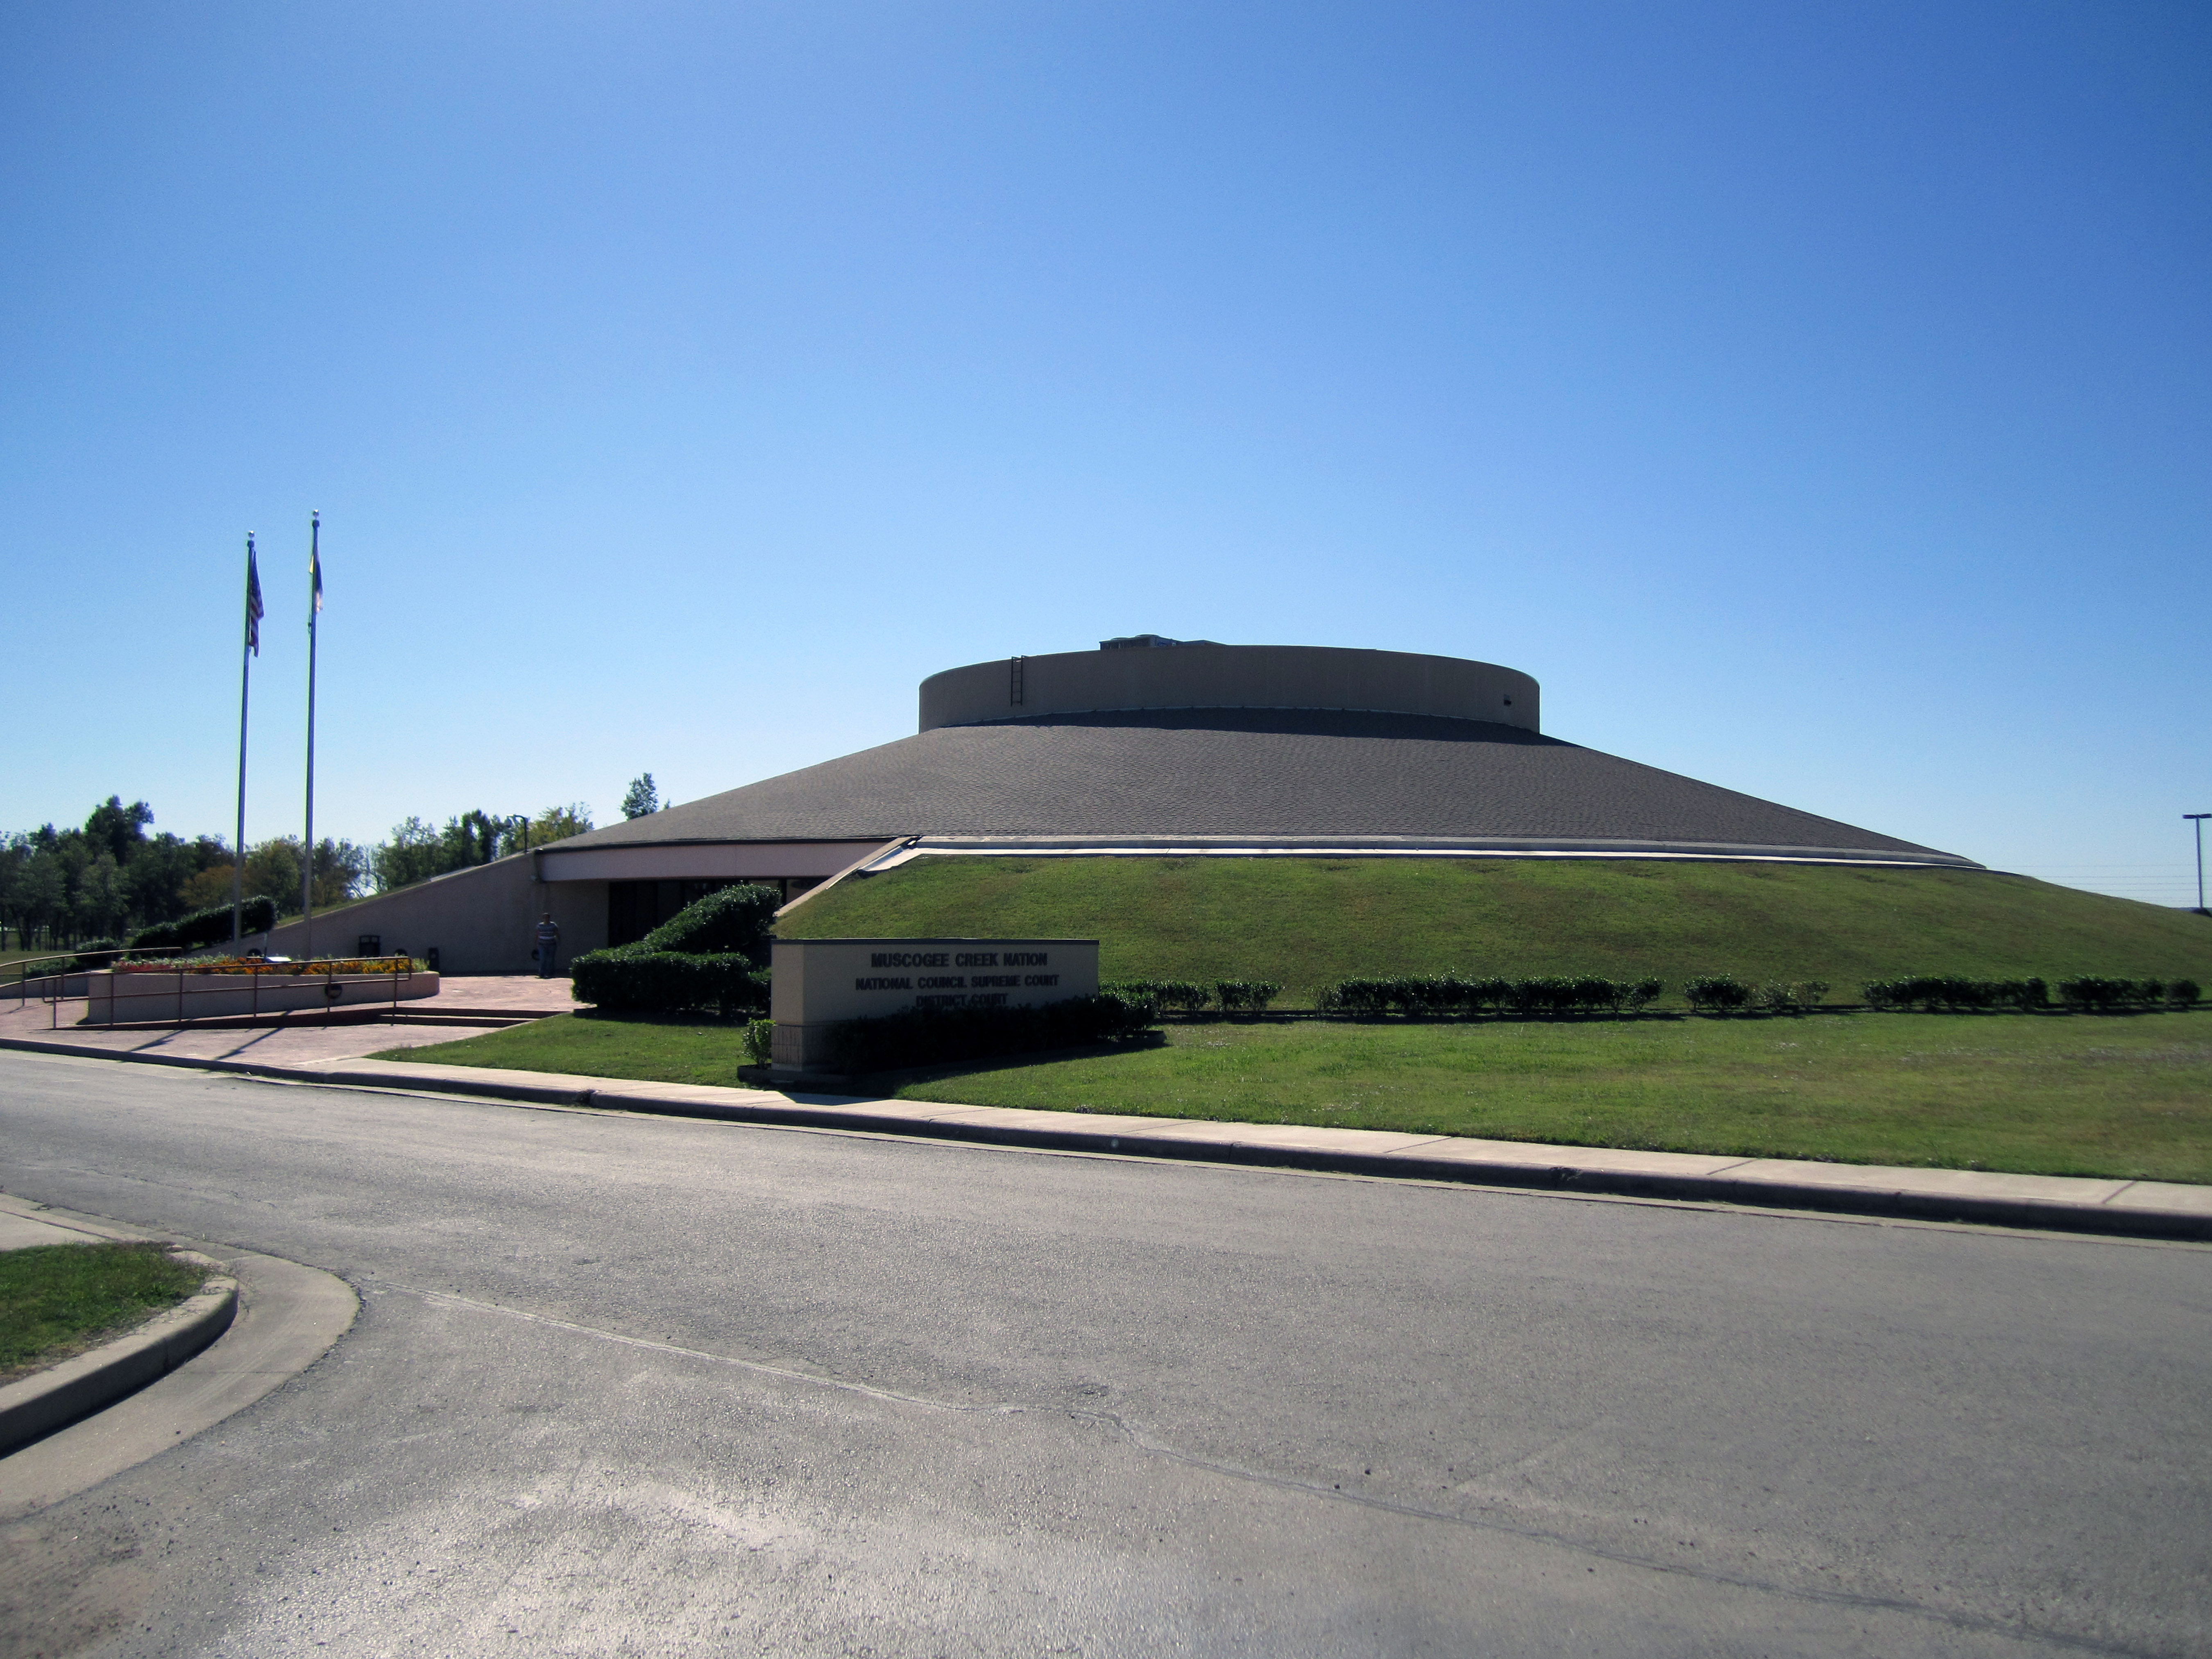 Muscogee Nation Mound building. Seat of government for both Legislative and Judicial branches of government